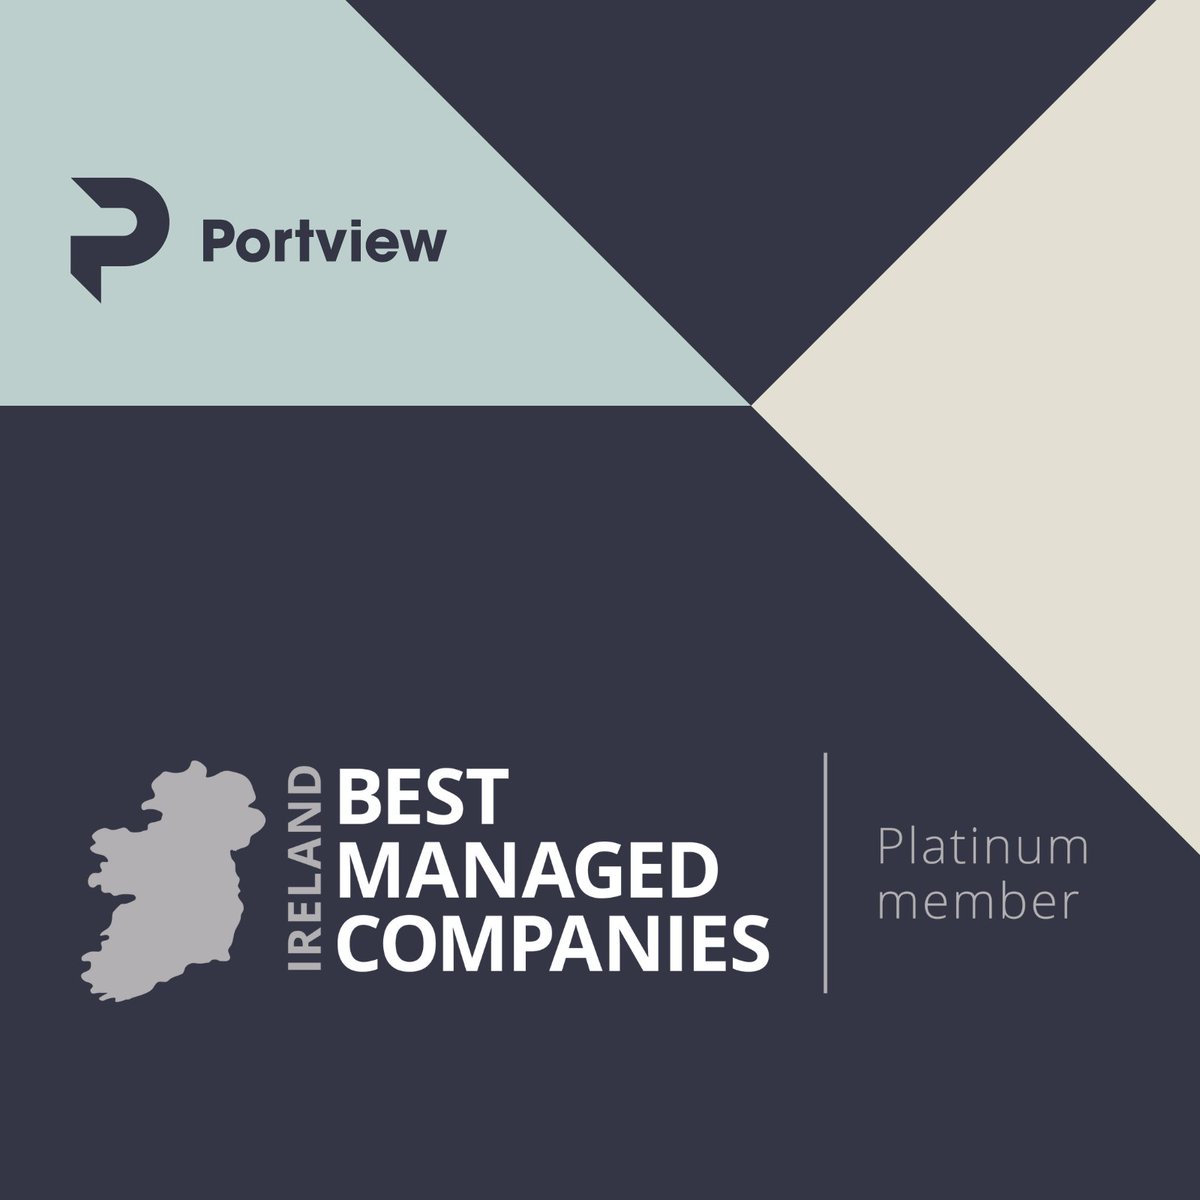 #TeamPortview has achieved recognition as one of Ireland's Best Managed Companies, marking an incredible 15-year milestone of excellence in our journey. We're honoured to be part of the prestigious awards program, led by @Deloitte in association with @bankofireland 🏆